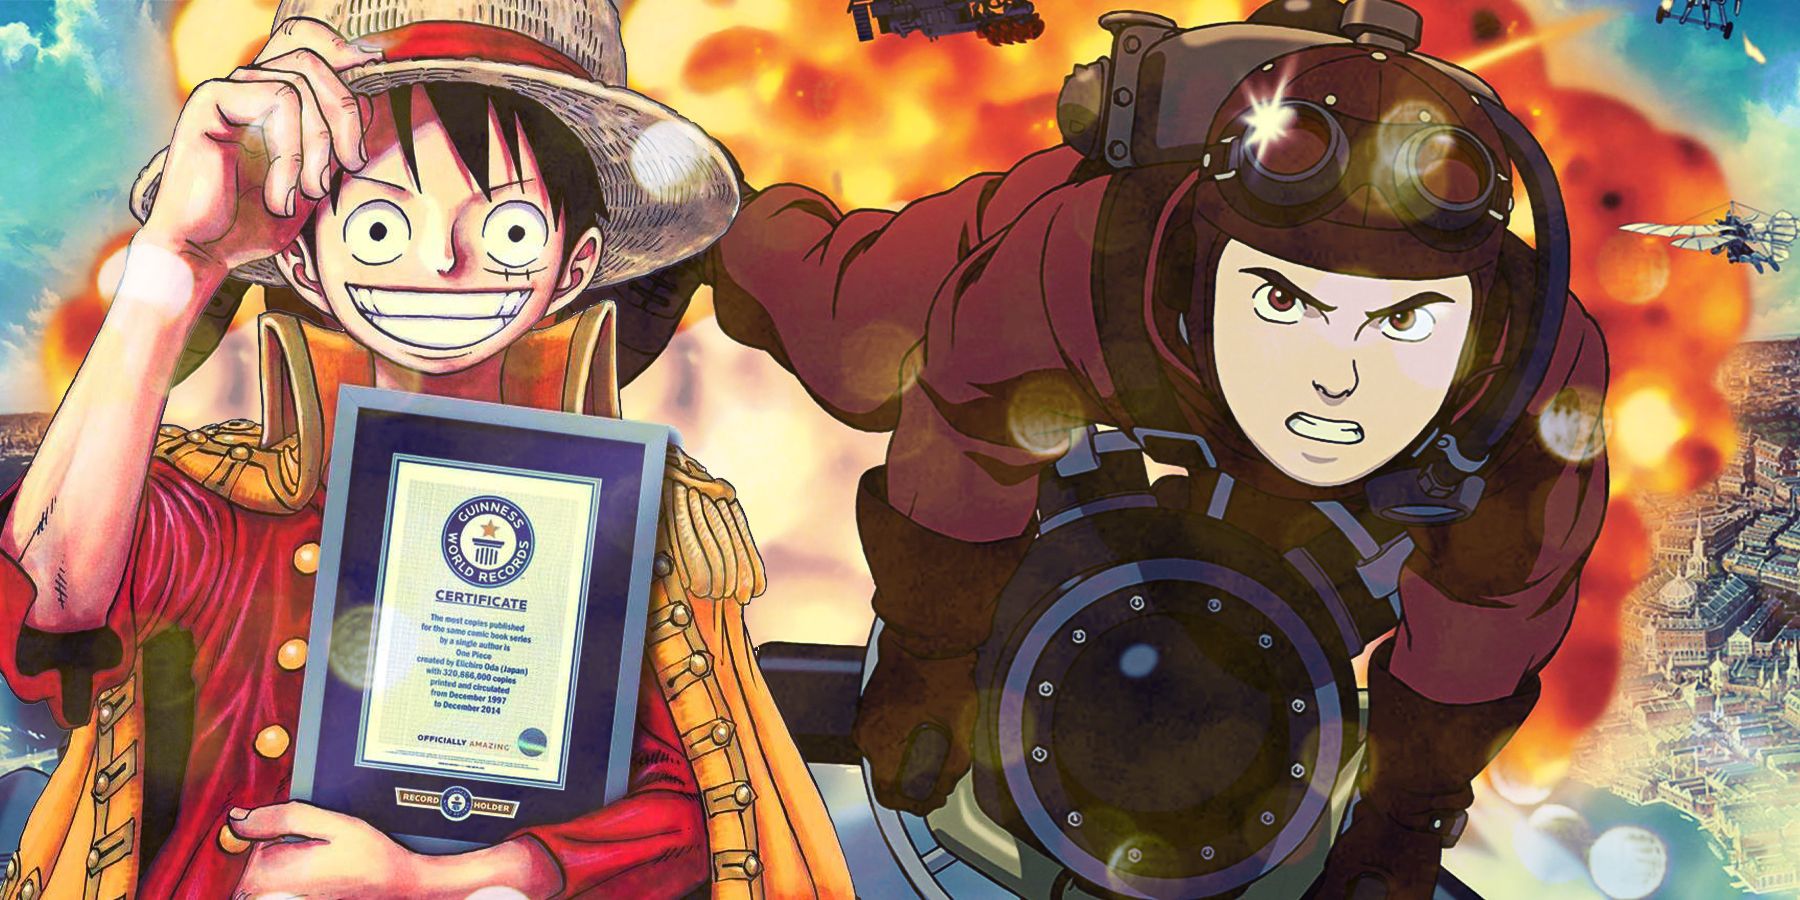 10 Amazing Guinness World Records (From the World of Anime & Manga)